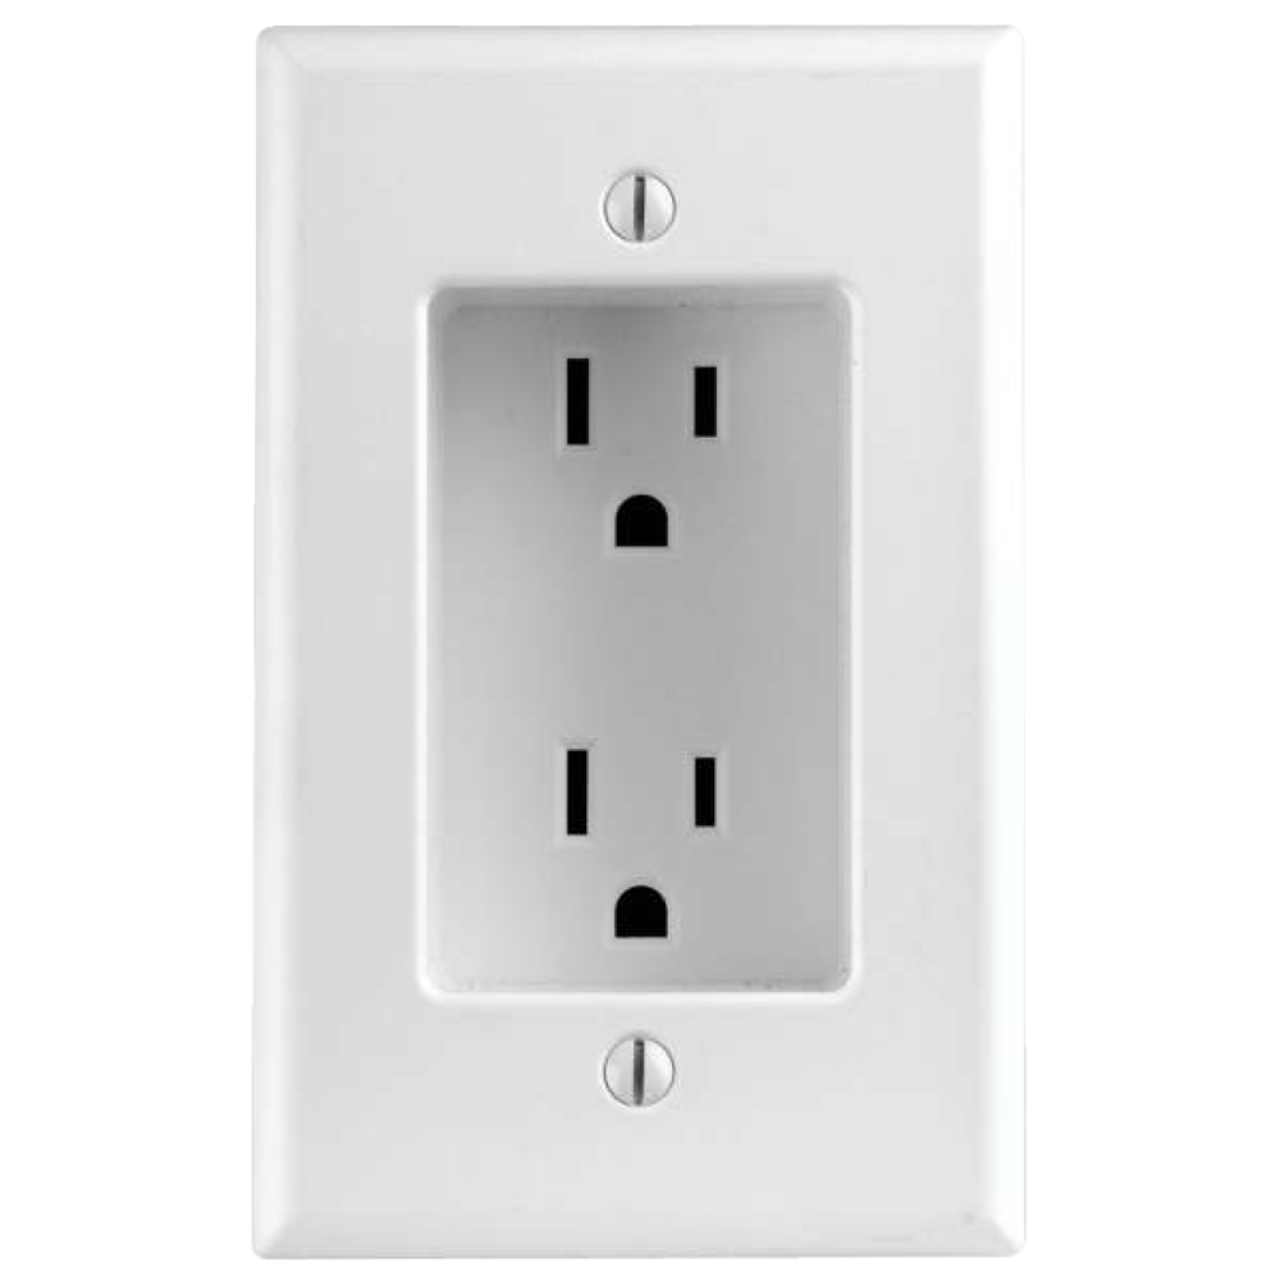 https://media-www.canadiantire.ca/product/fixing/electrical/rough-electrical/0527508/white-1-gang-recessed-receptacle-b14d45ab-5b50-4a48-9196-da69b41c3370.png?imdensity=1&imwidth=640&impolicy=mZoom